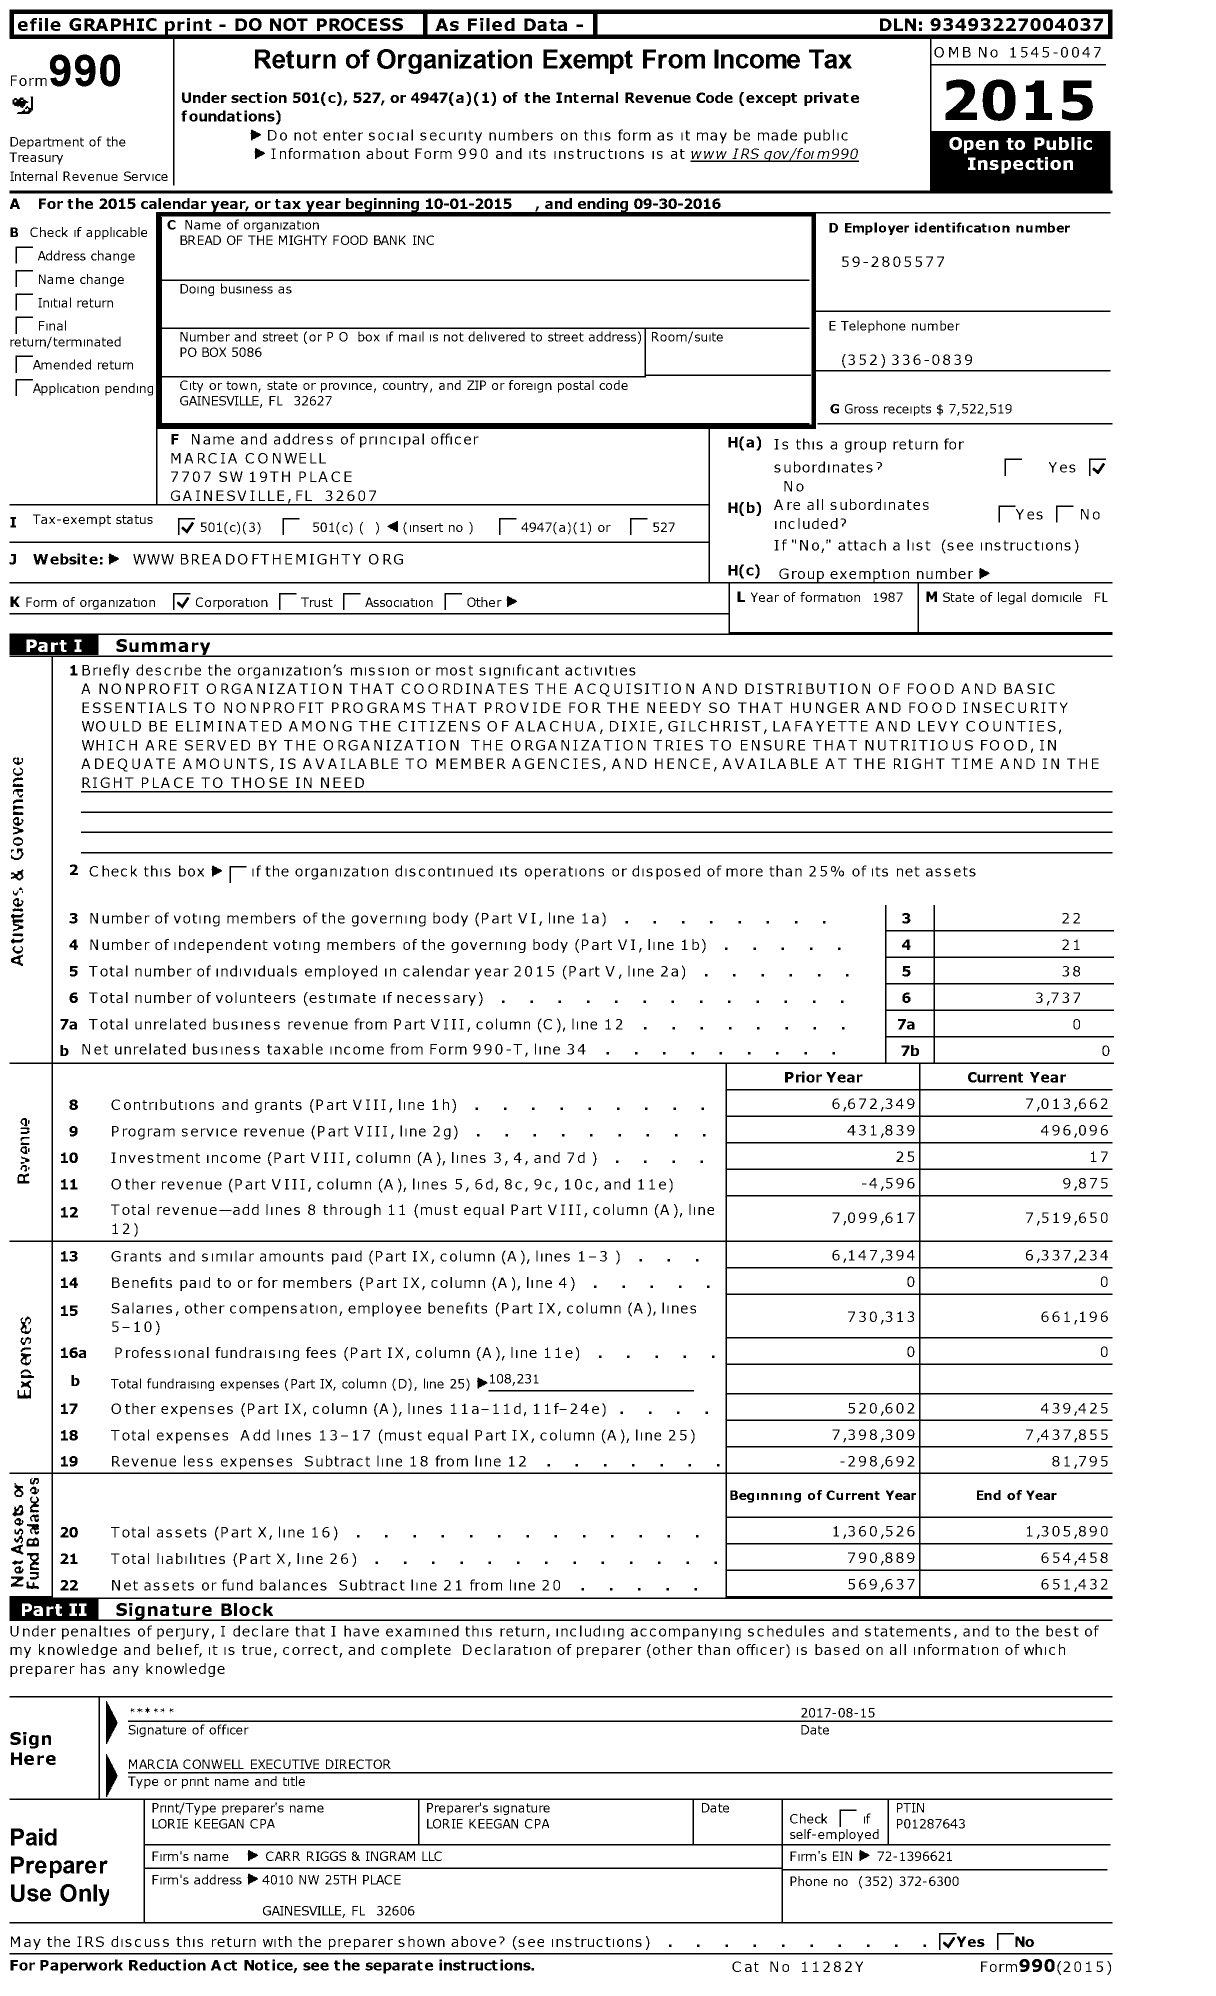 Image of first page of 2015 Form 990 for Bread of the Mighty Food Bank (BMFB)